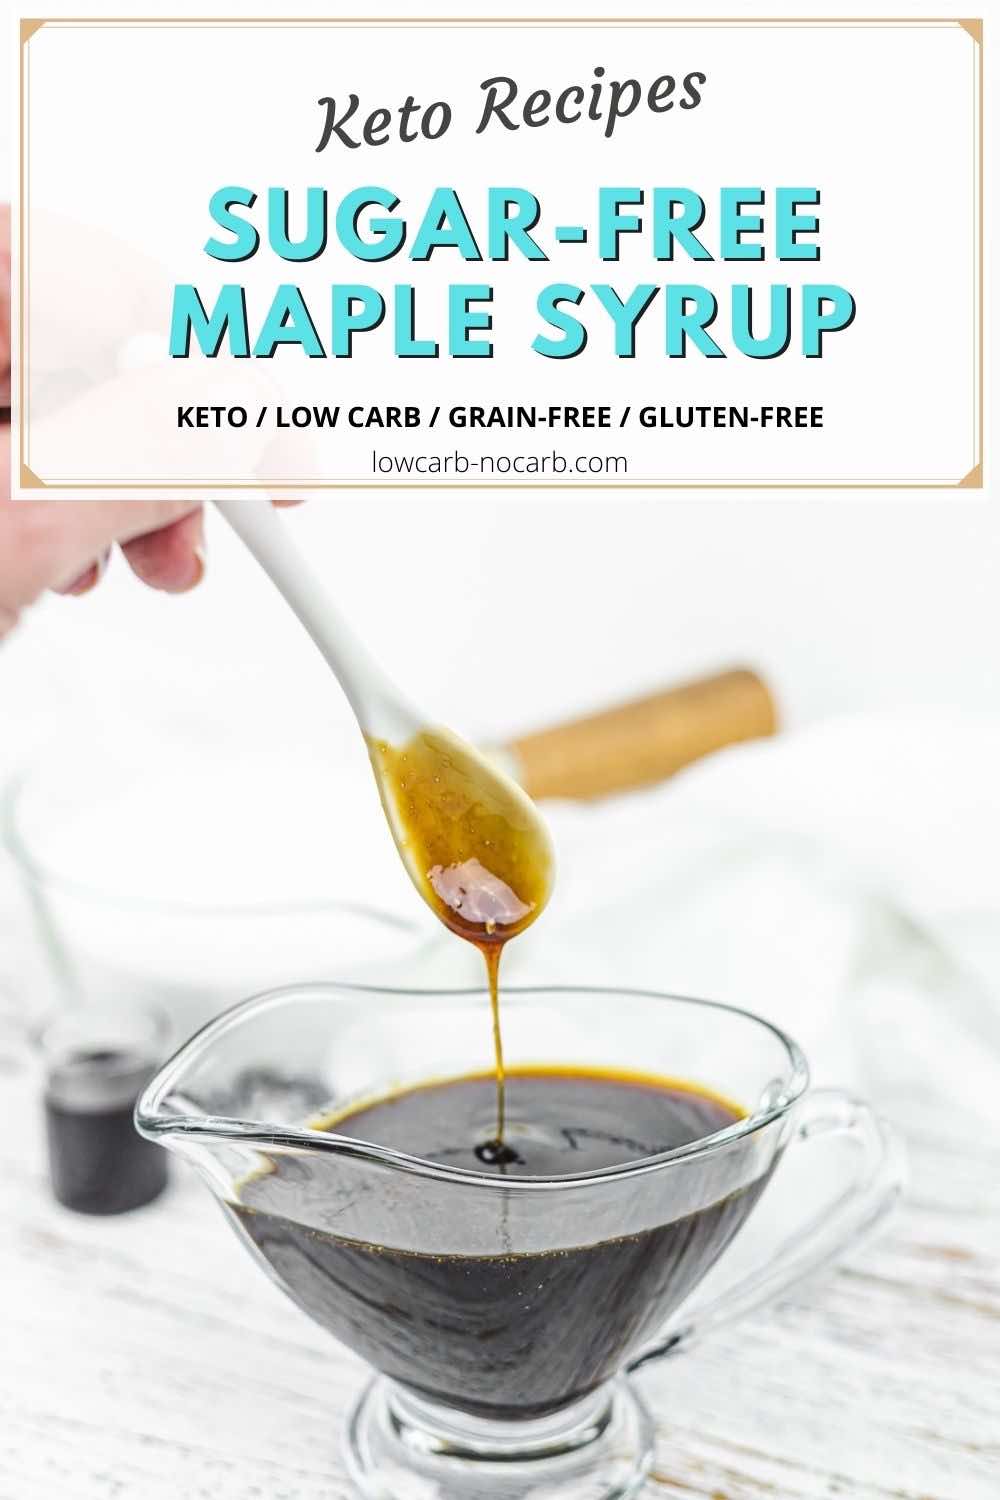 Maple syrup and diabetes